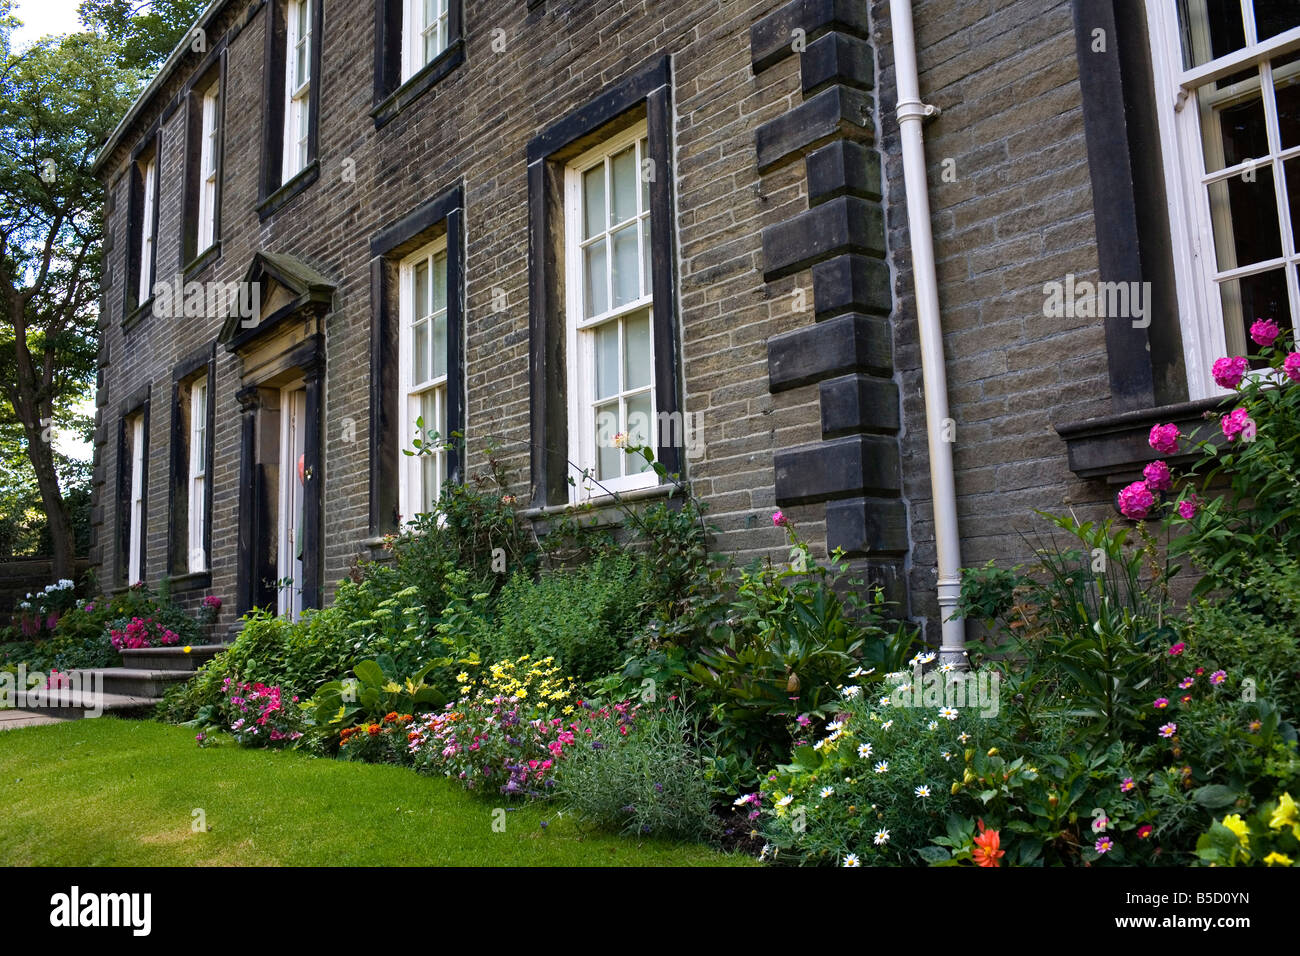 The Bronte Parsonage, Haworth, Bronte Country, West Yorkshire, England, Europe Stock Photo